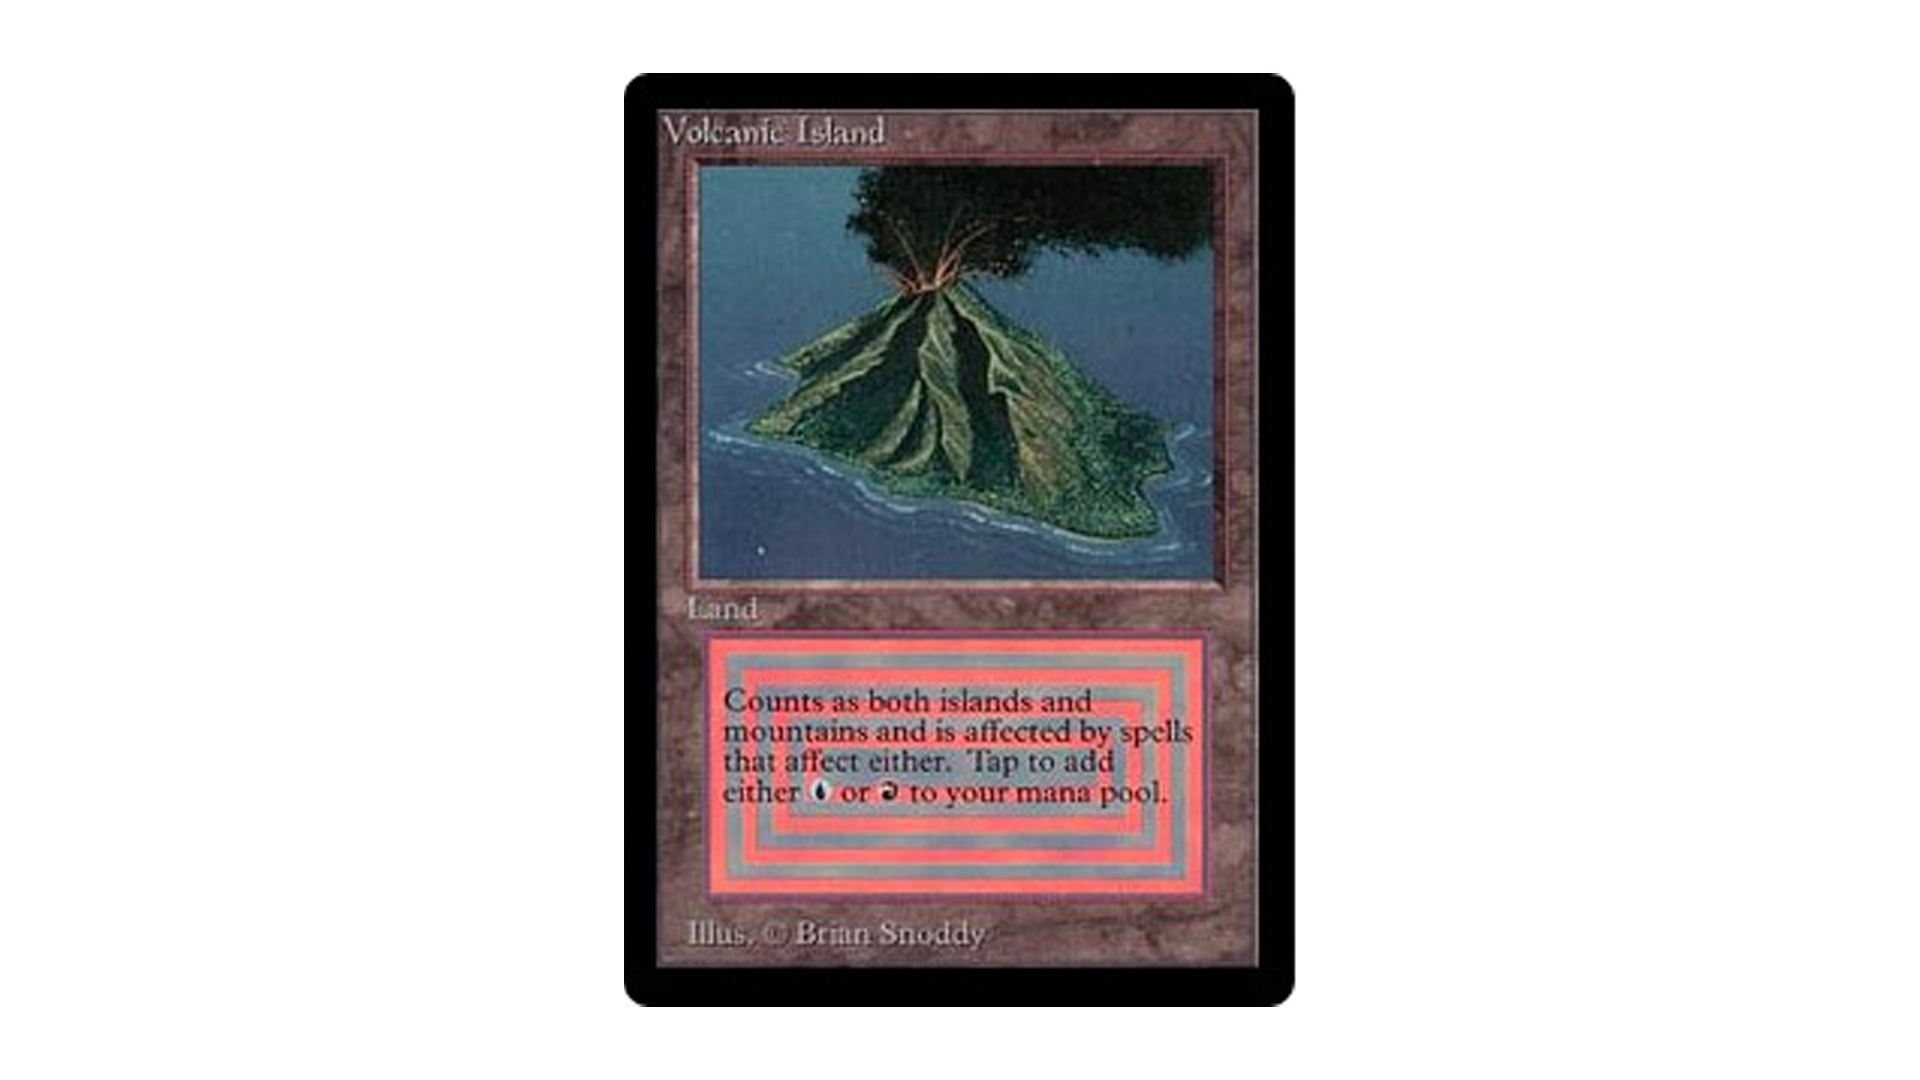 MtG Expensive and Rare card Volcanic Island